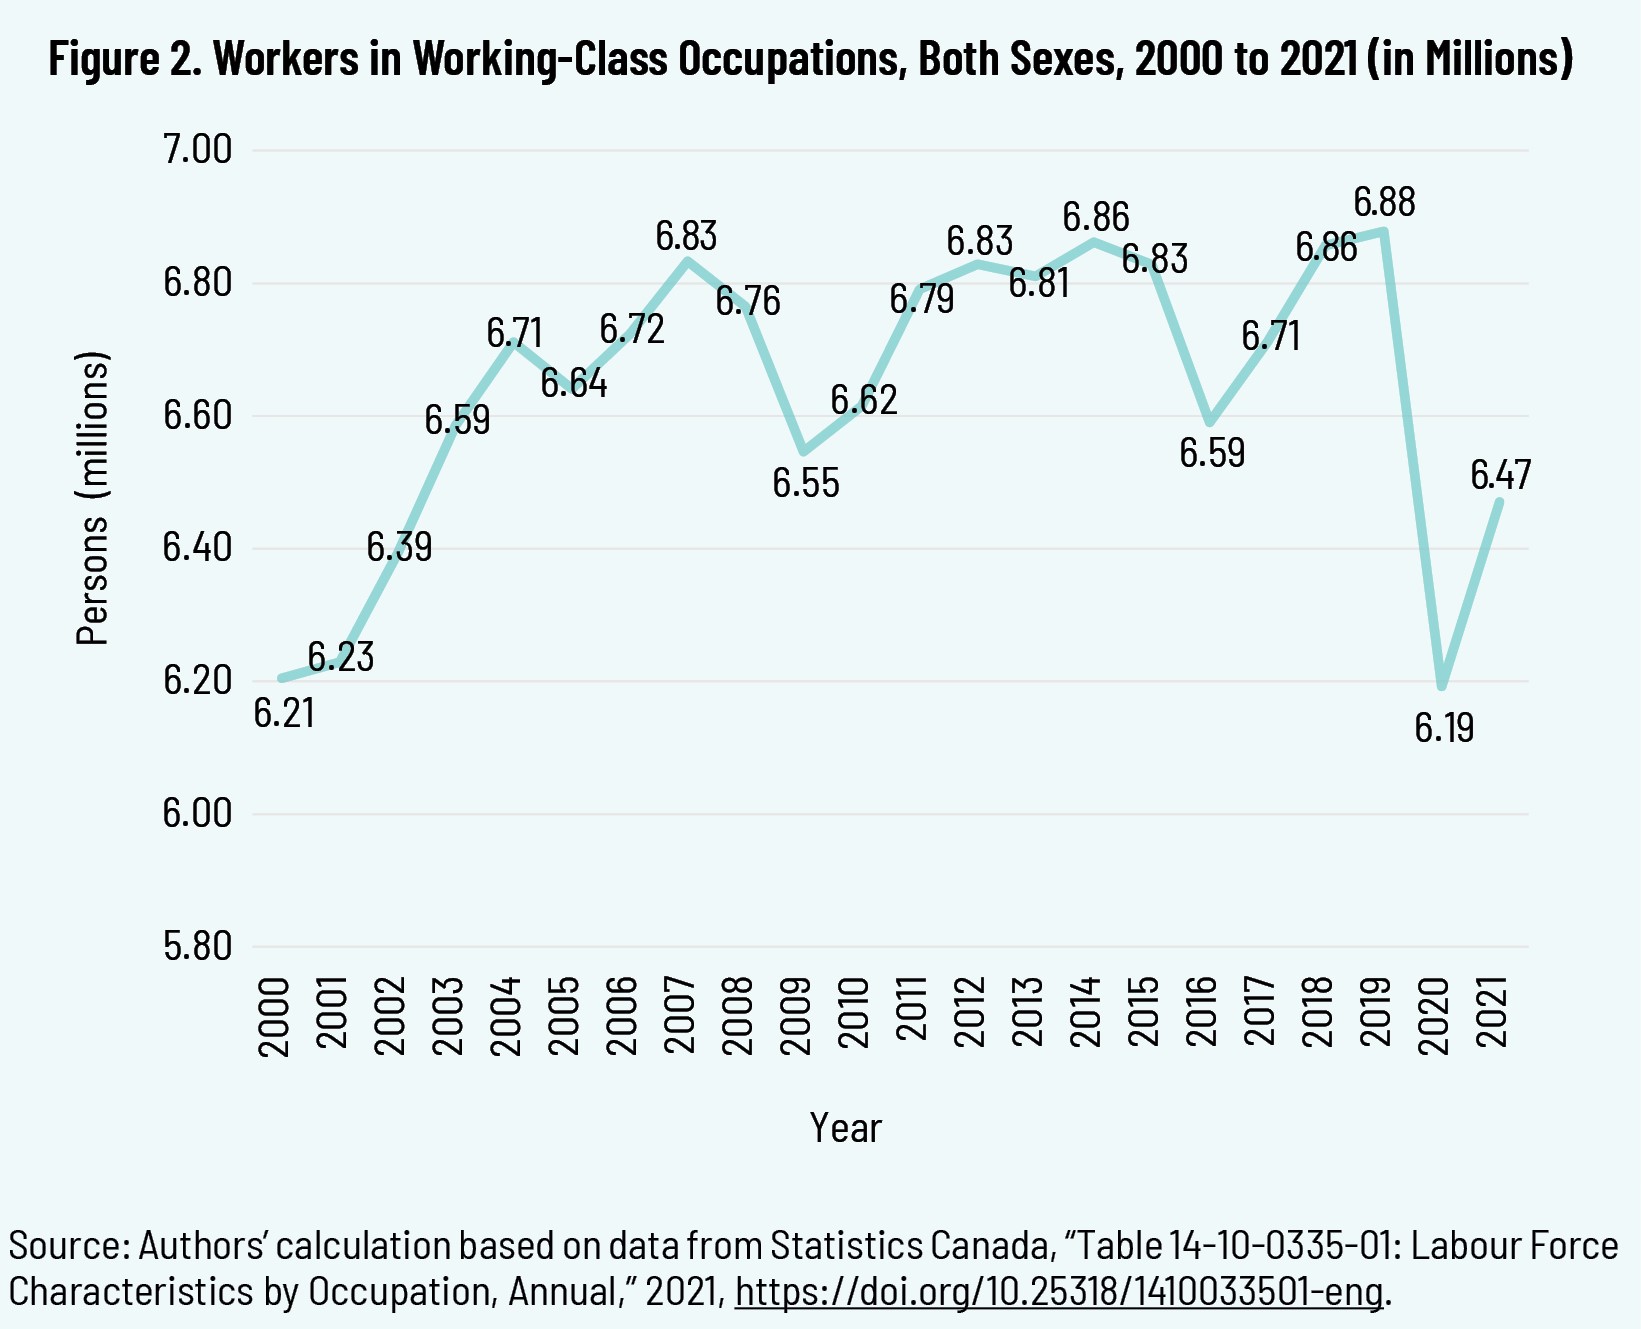 Figure 2. Workers in Working-Class Occupations, Both Sexes, 2022 to 2021 (in Millions)